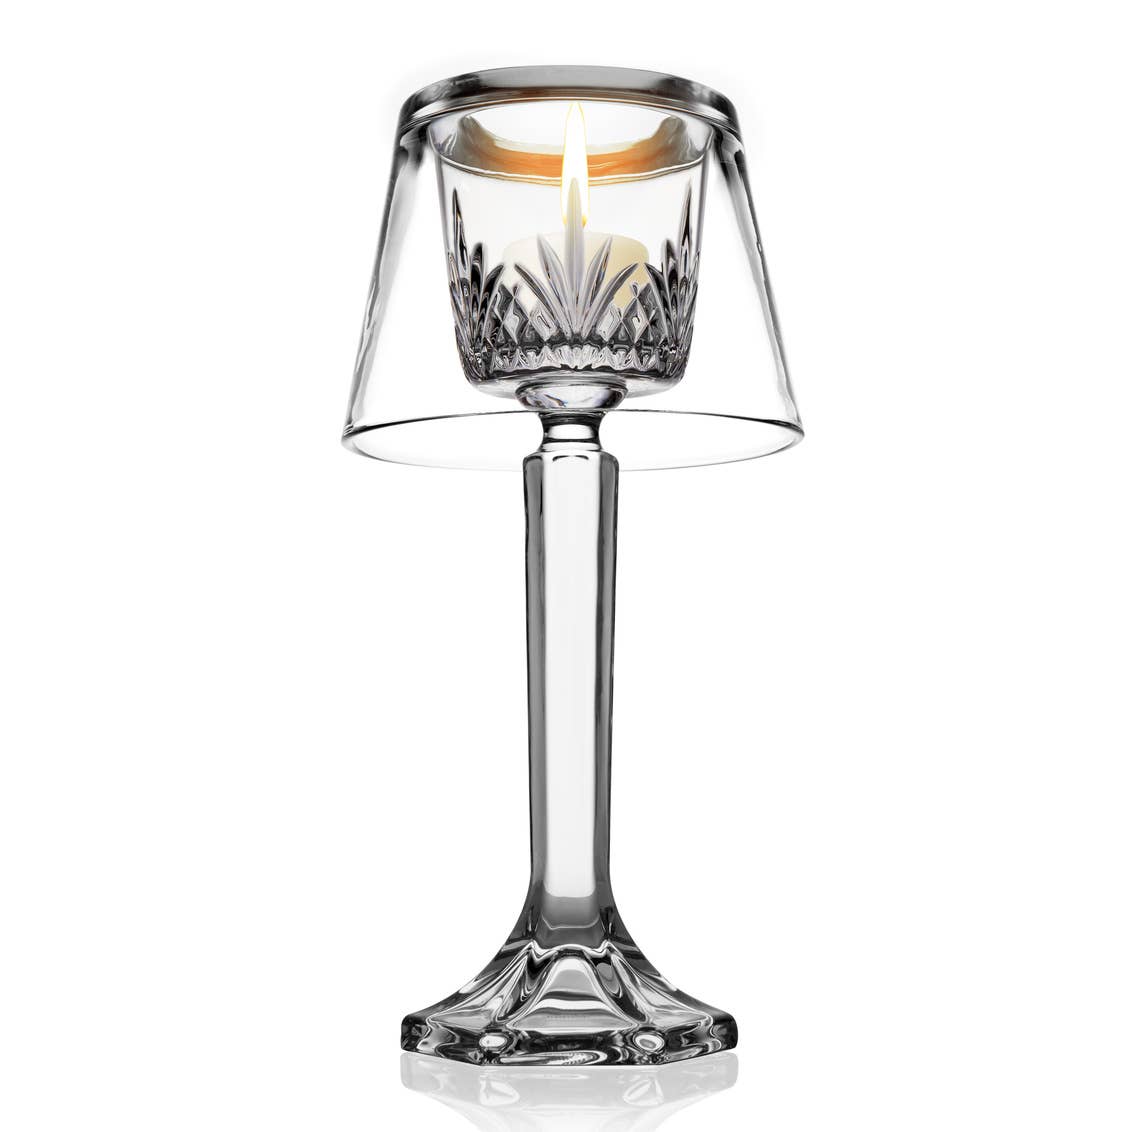 Clear Dublin Candle Holder Lamp by Godinger displayed in a sophisticated home decor setting.